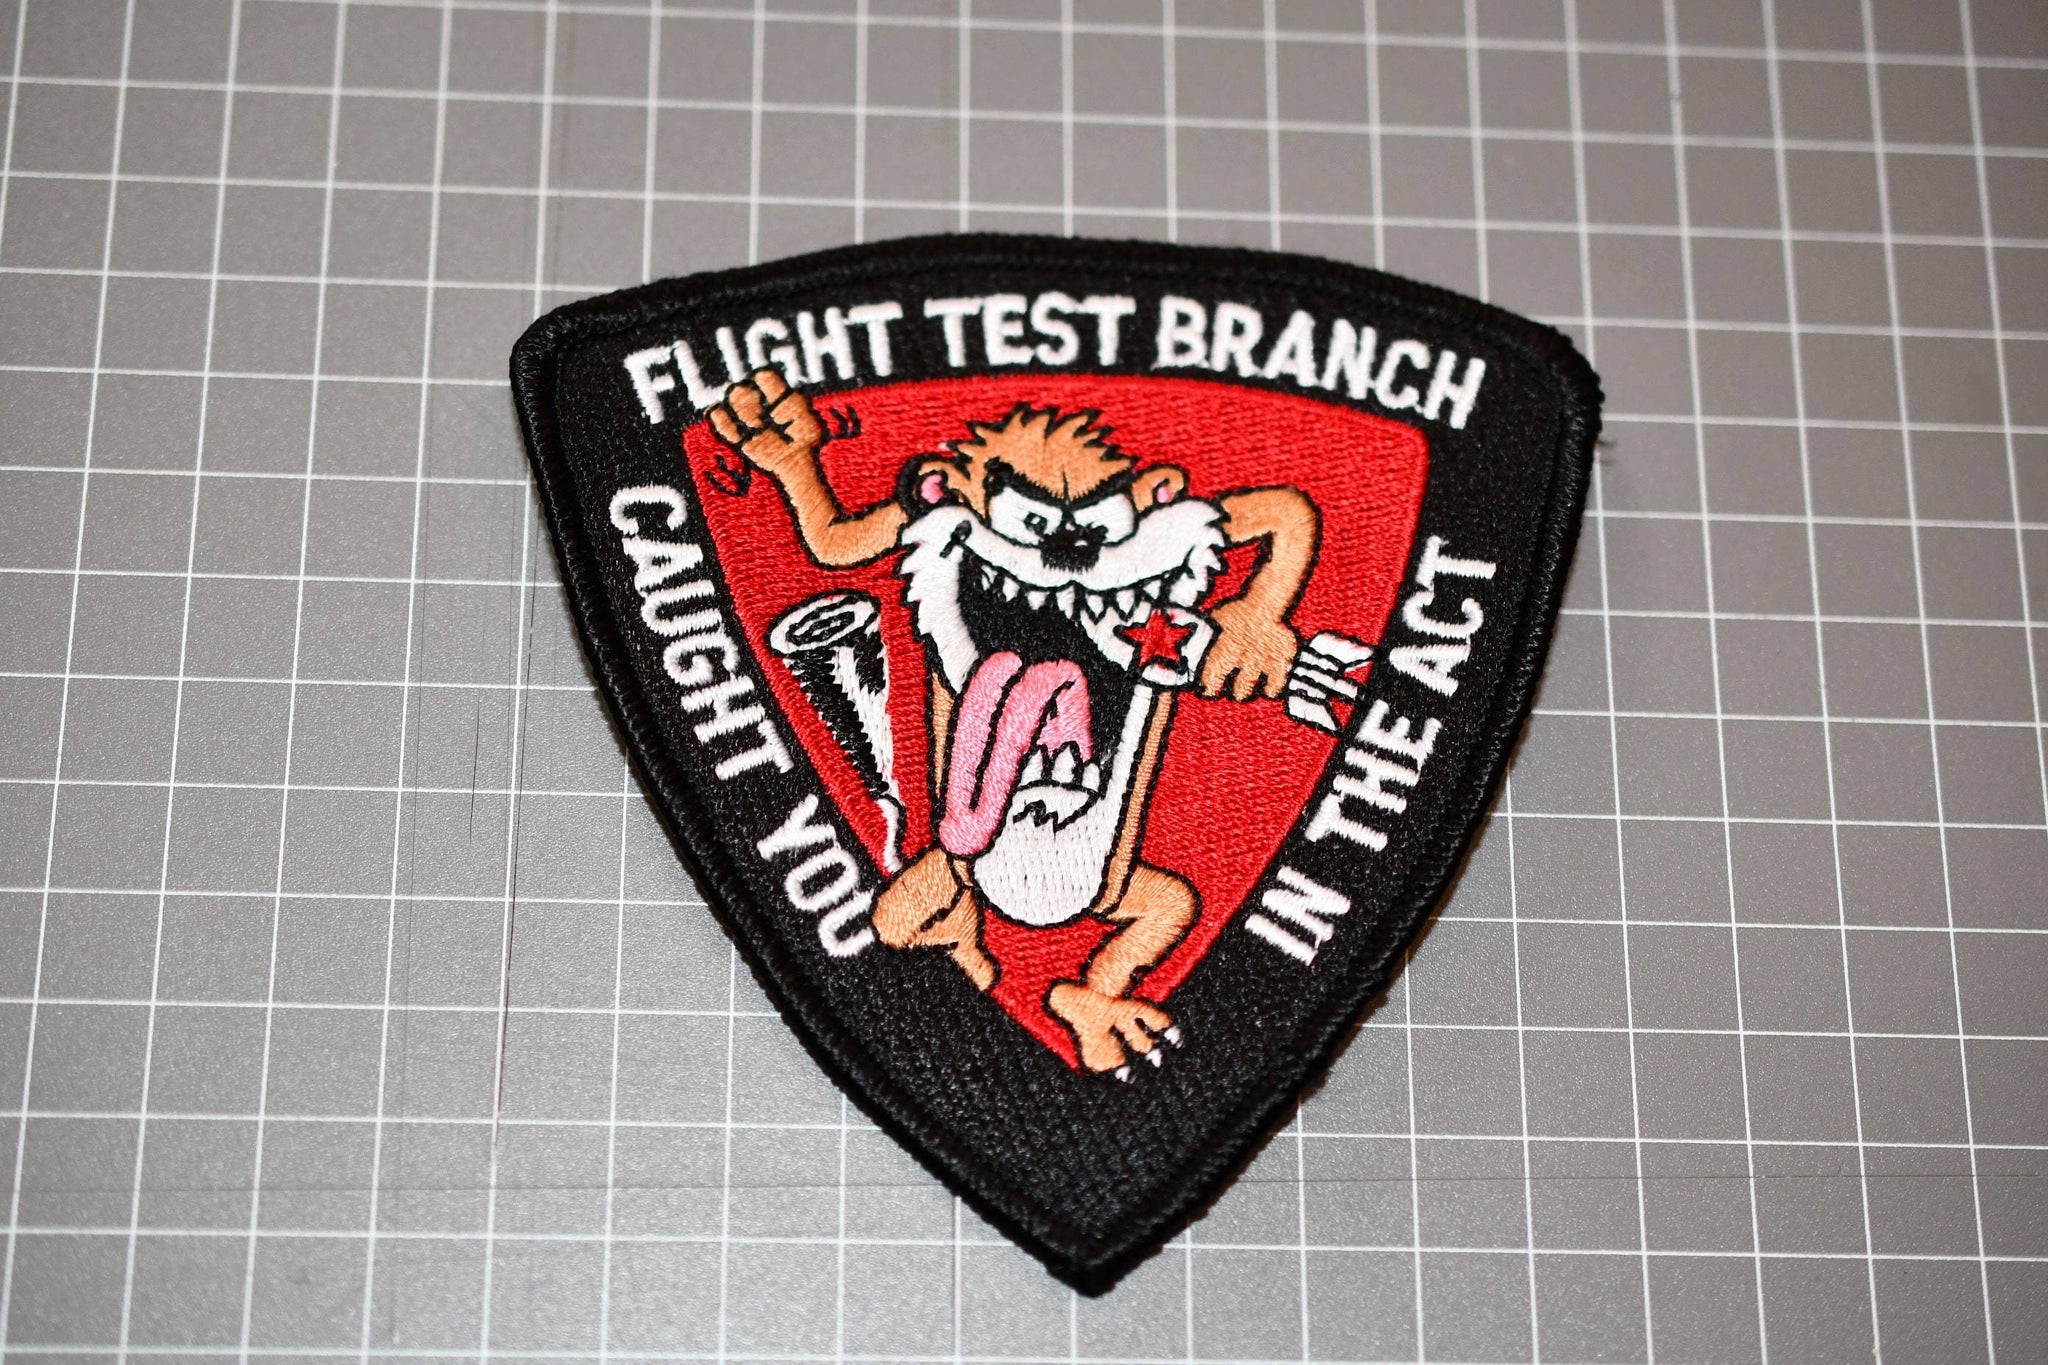 USAF 452nd Flight Test Branch "Caught You In The Act" Patch (B10-135)